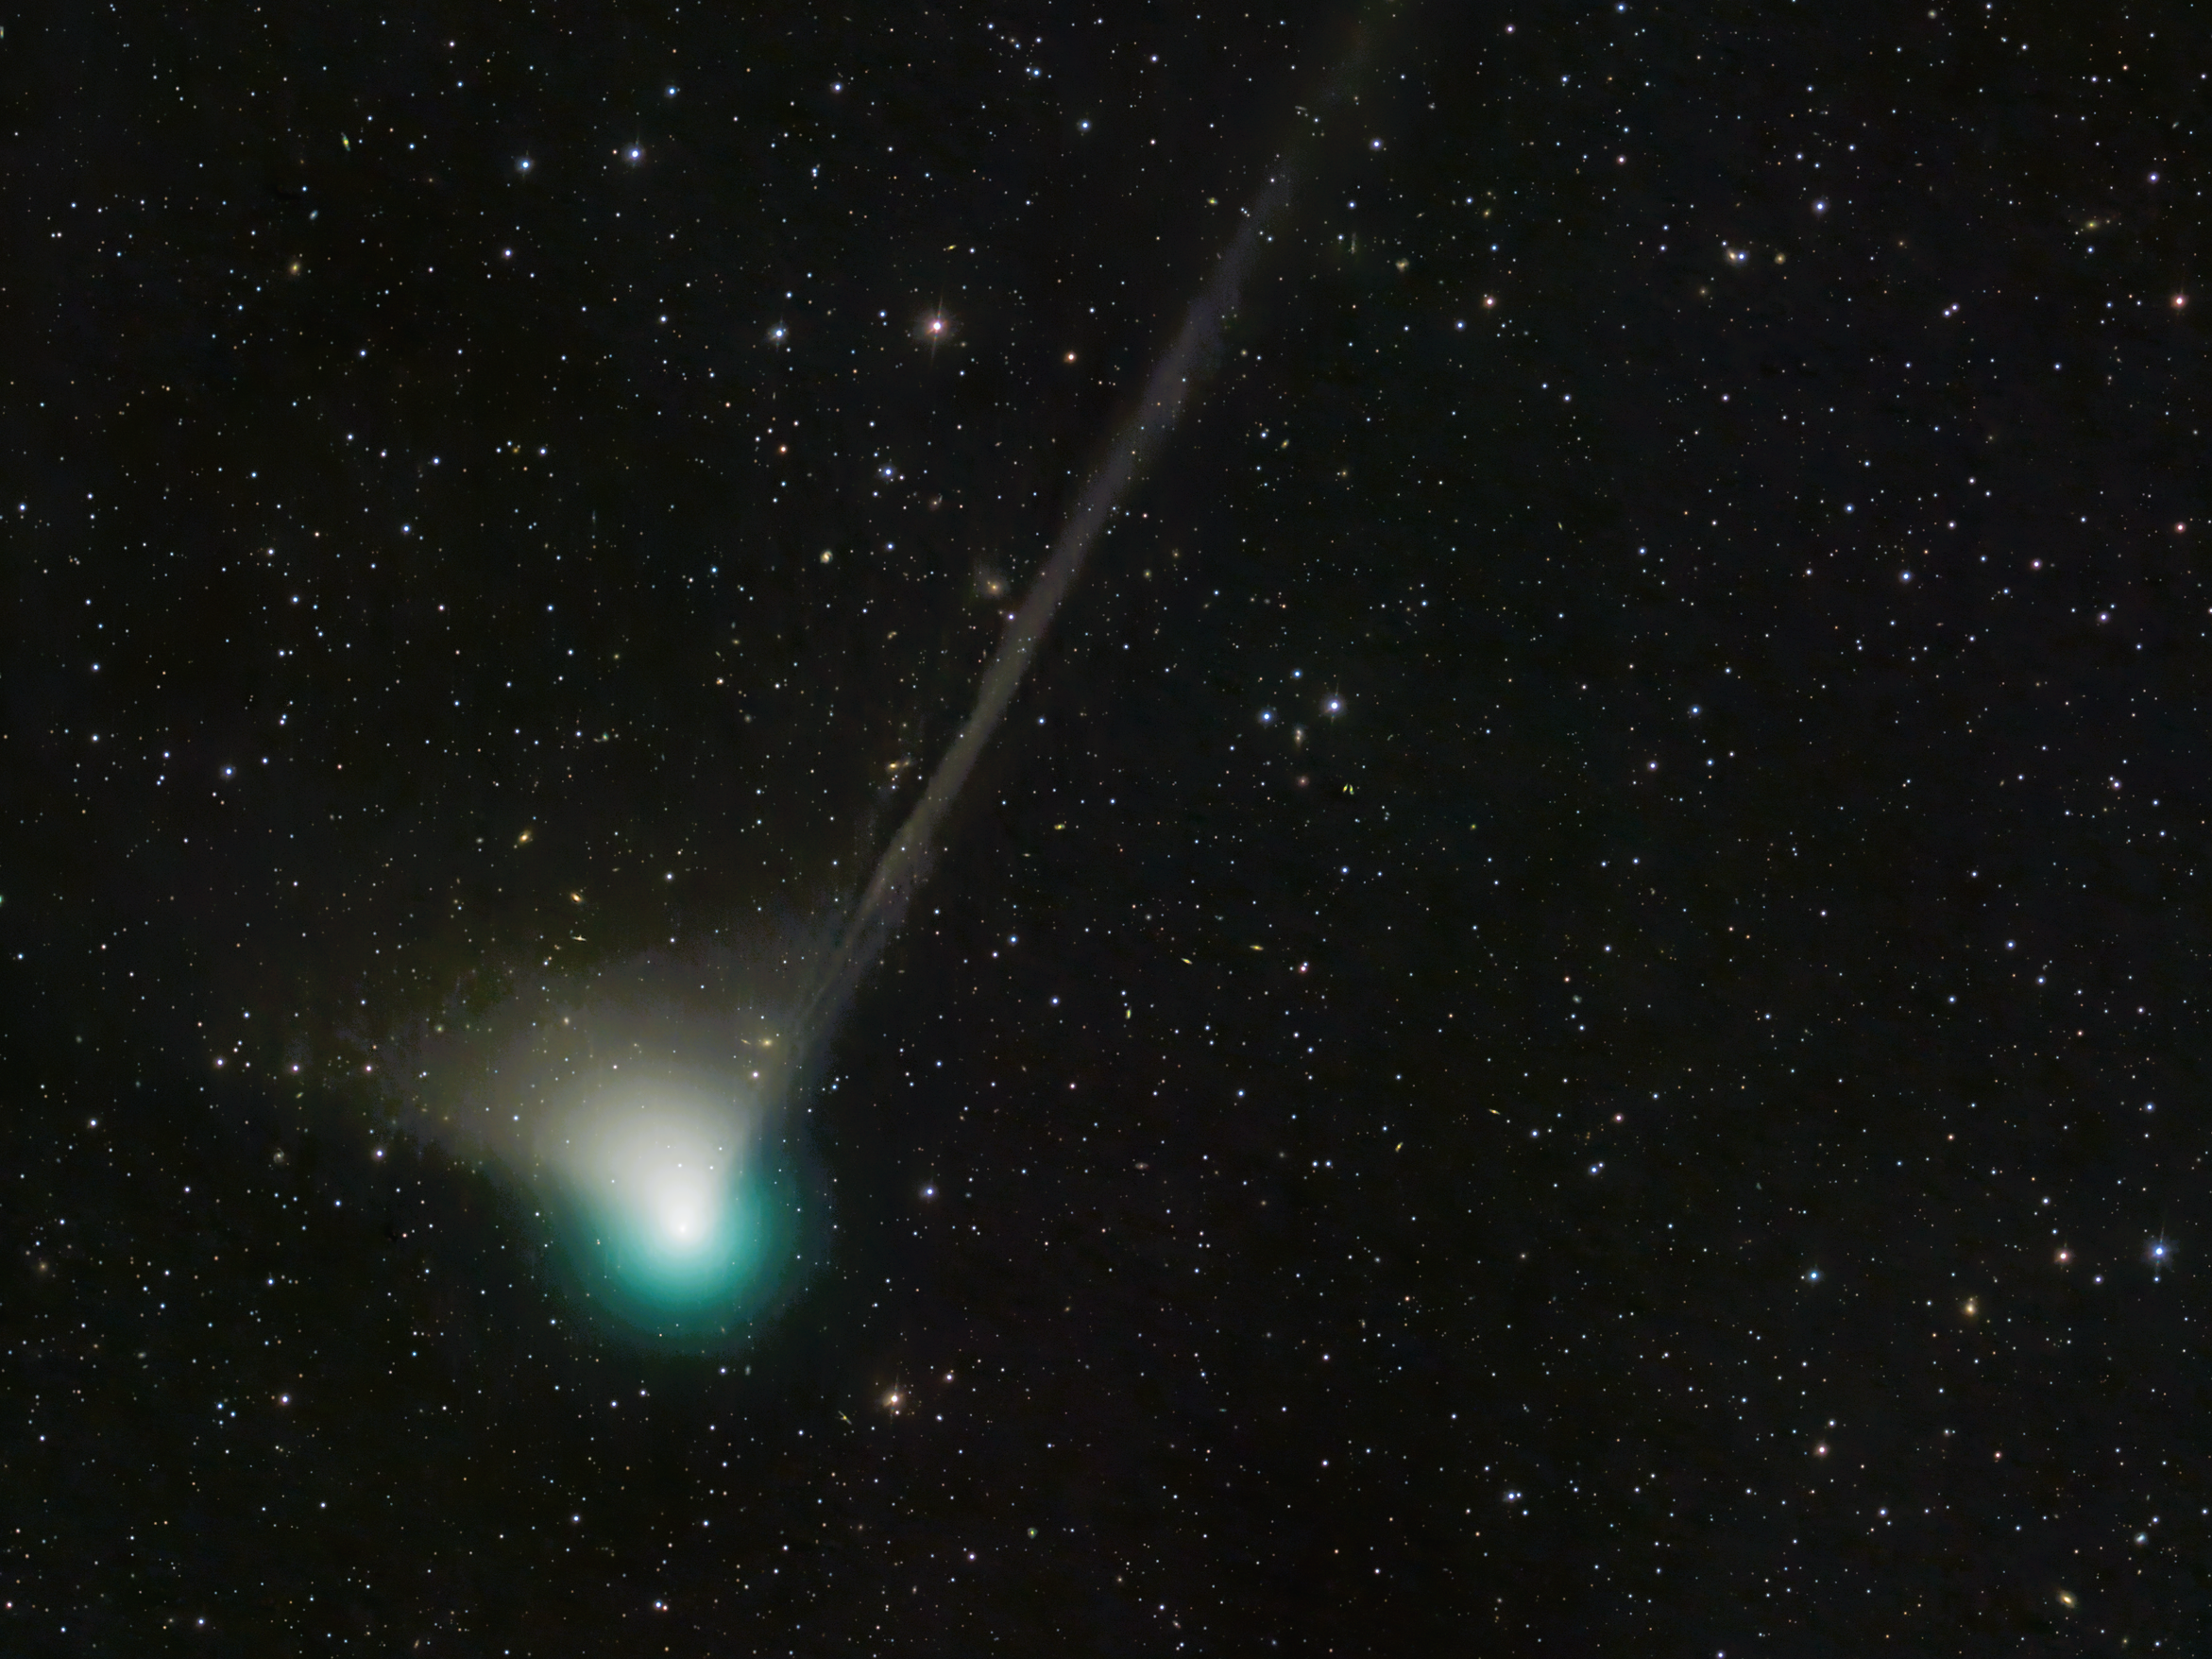 The E3 comet captured by astronomers at Nasa in December last year